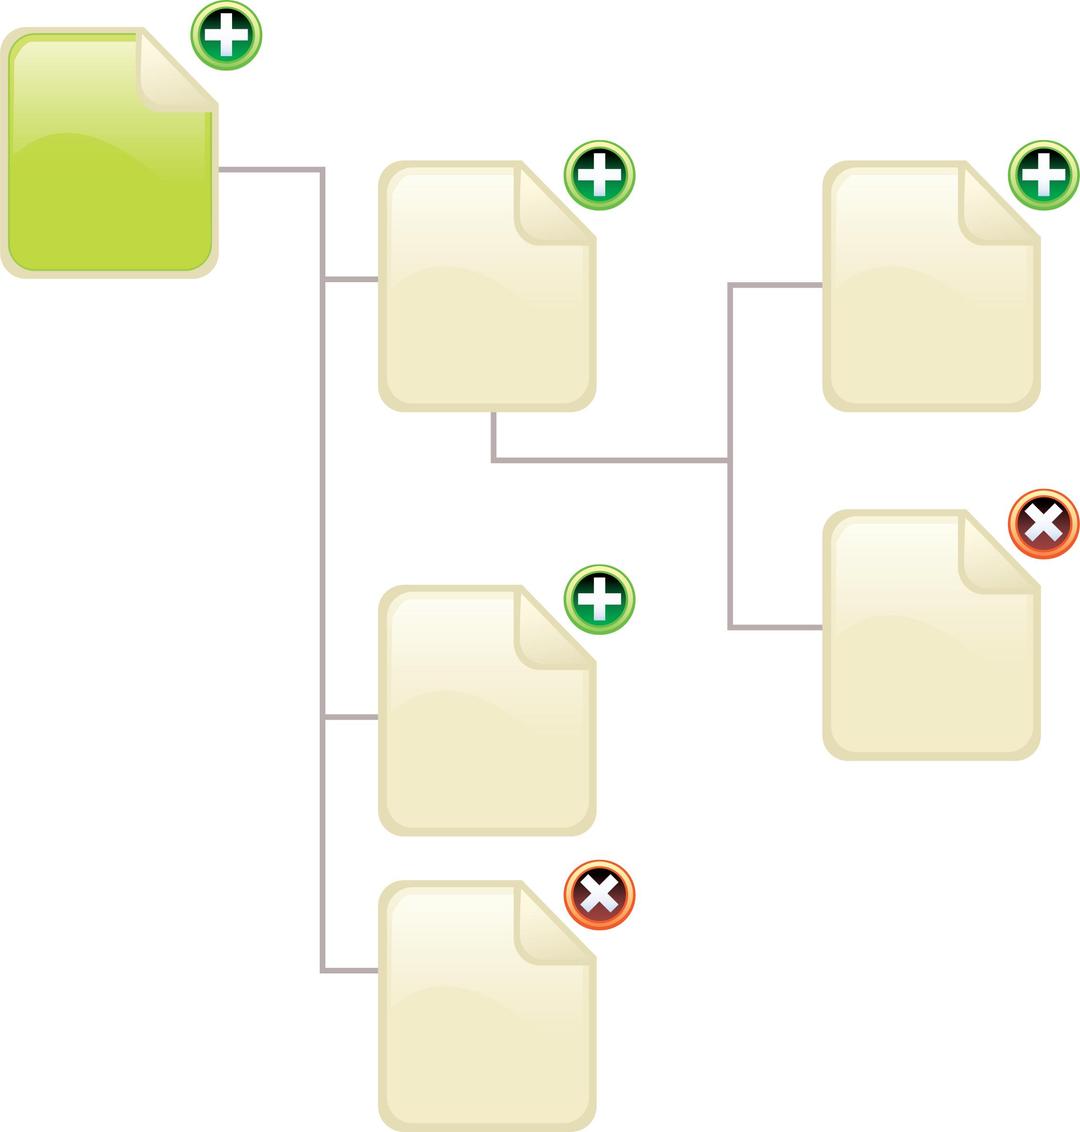 Information Architecture icons png transparent